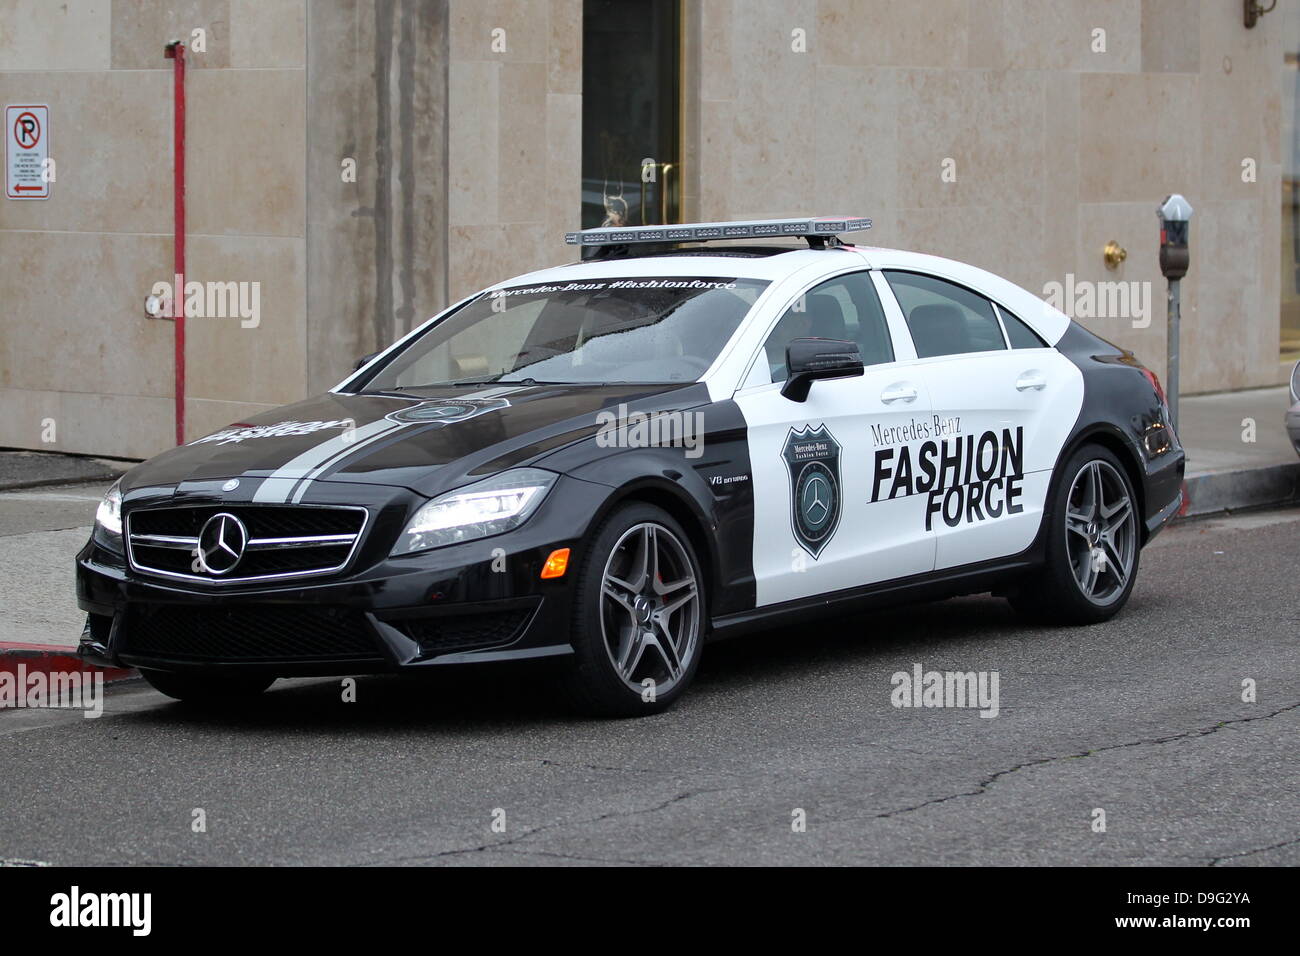 MERCEDES FASHION FORCE CAR PATROLS LA The Mercedes-Benz USA,Fashion Force  car could be seen, patrolling the streets of Los Angeles during the Academy  Awards week - on a mission to recruit potential